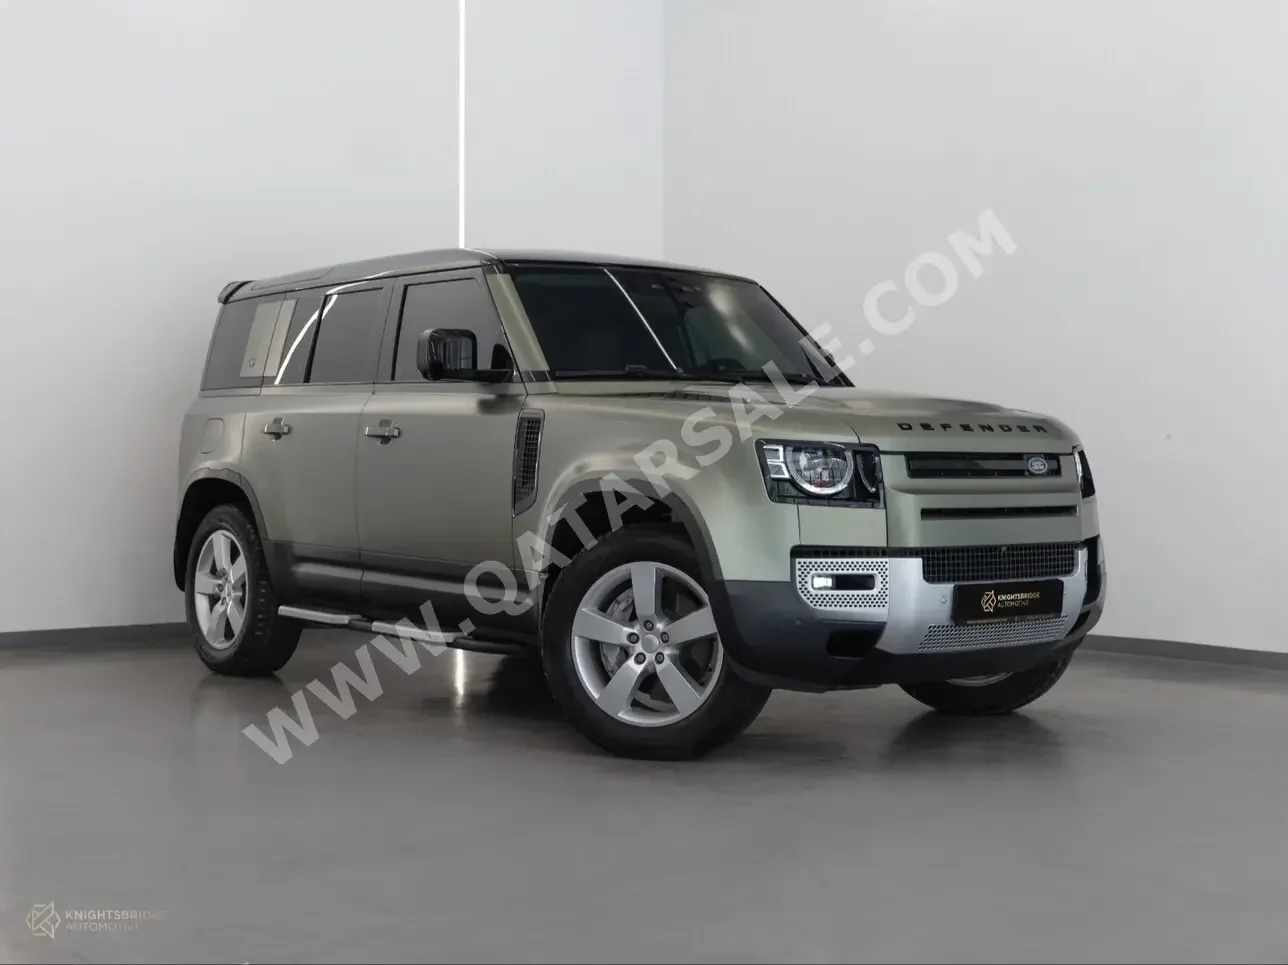 Land Rover  Defender  110 HSE  2020  Automatic  42,570 Km  6 Cylinder  Four Wheel Drive (4WD)  SUV  Green  With Warranty